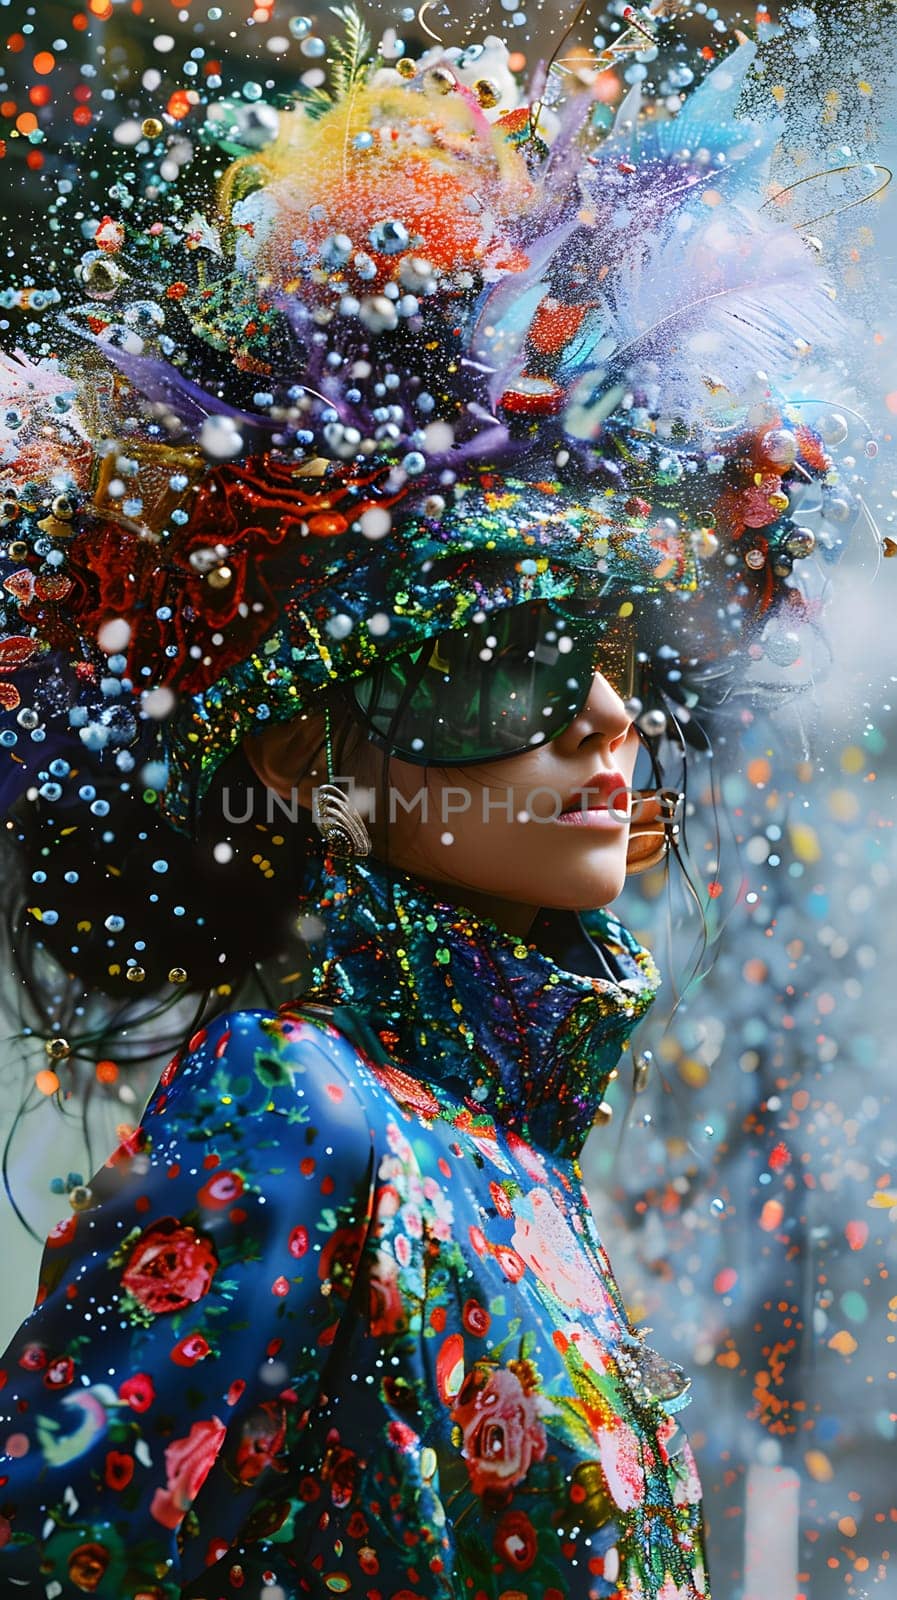 a woman wearing a colorful hat and sunglasses is surrounded by confetti by Nadtochiy